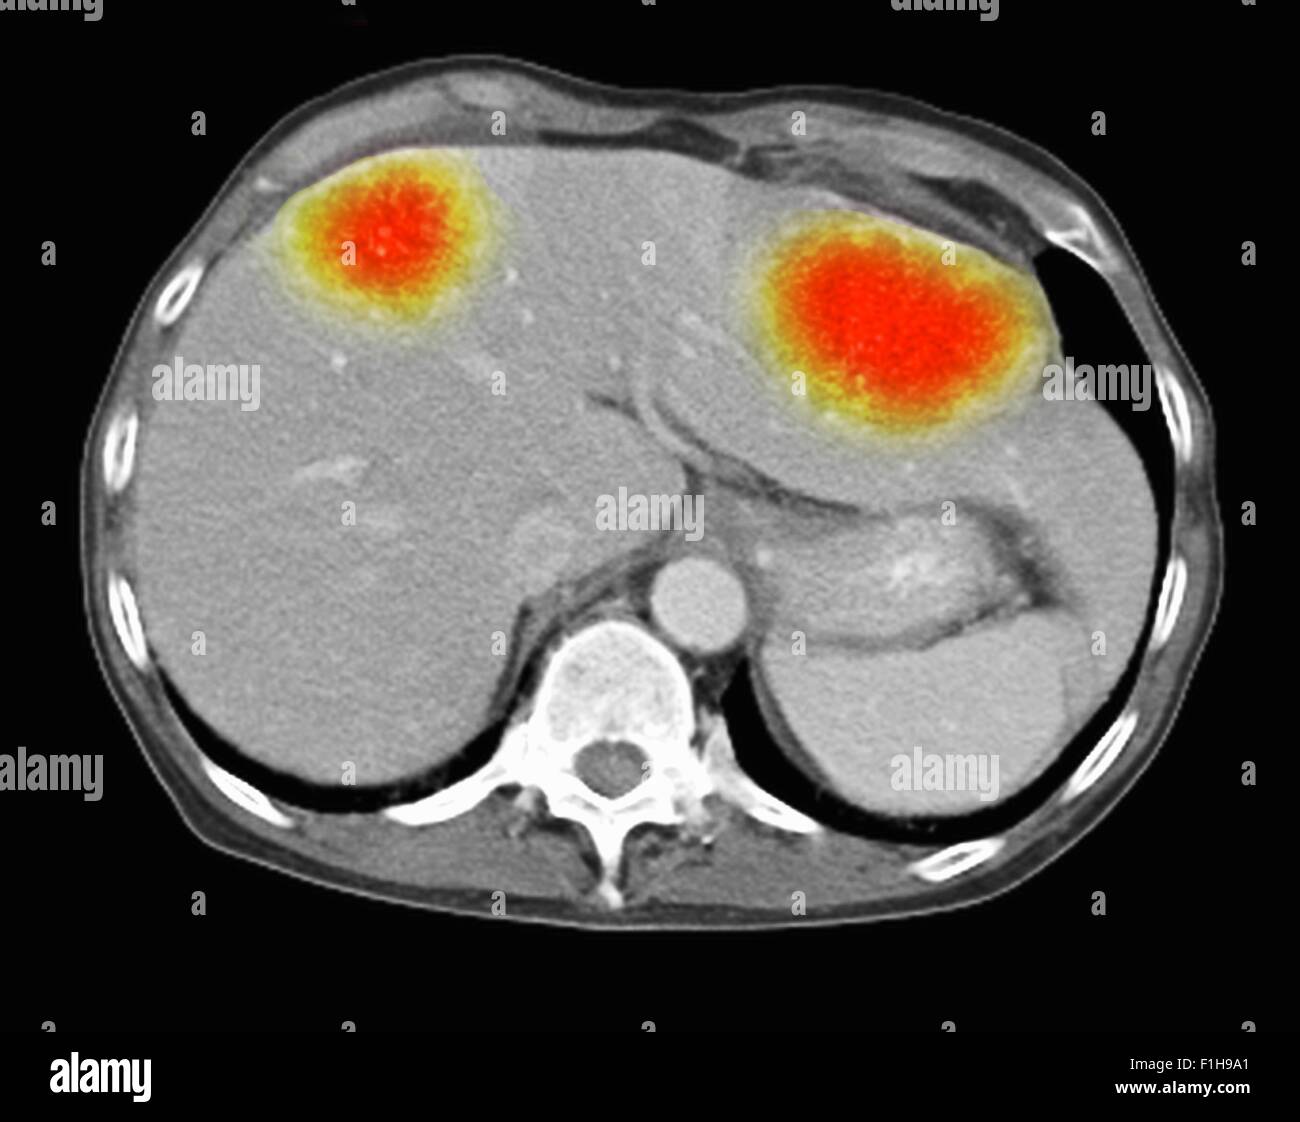 Image co-registered PET-CT study dual modality scanner. Patient multiple metastatic lesions liver & lung Stock Photo